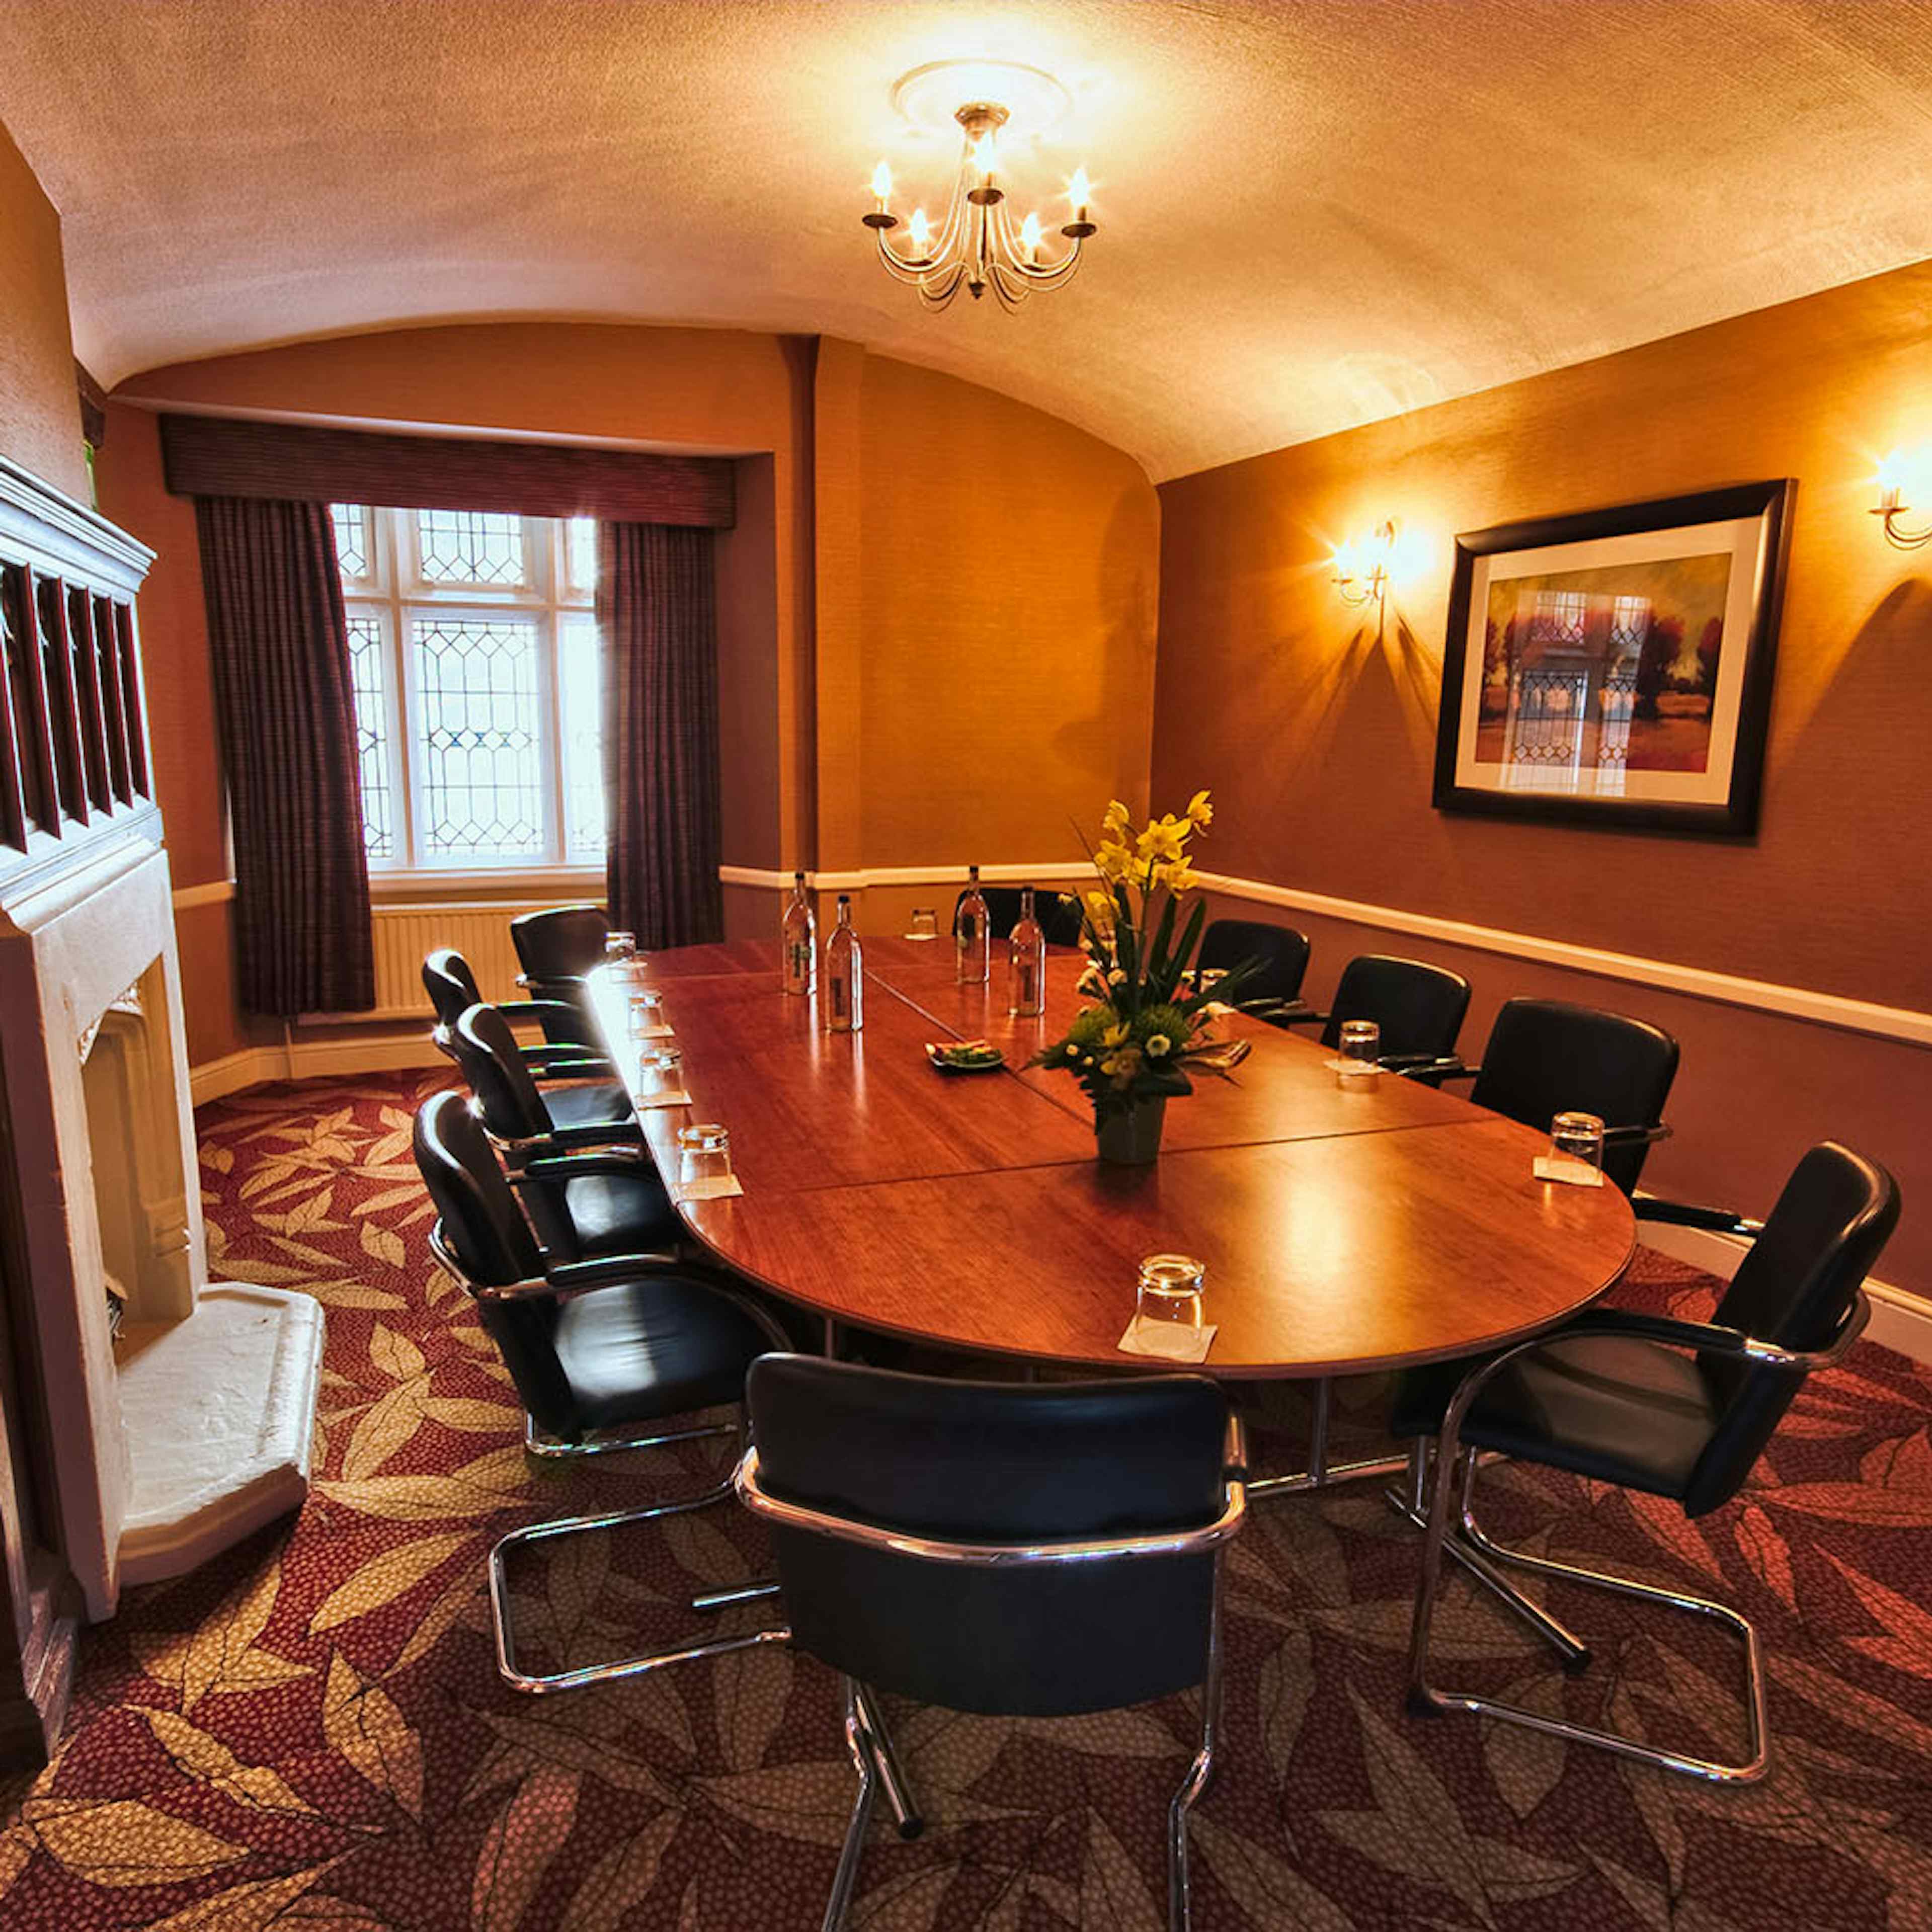 The Abbey Hotel - Hereford Suite image 1